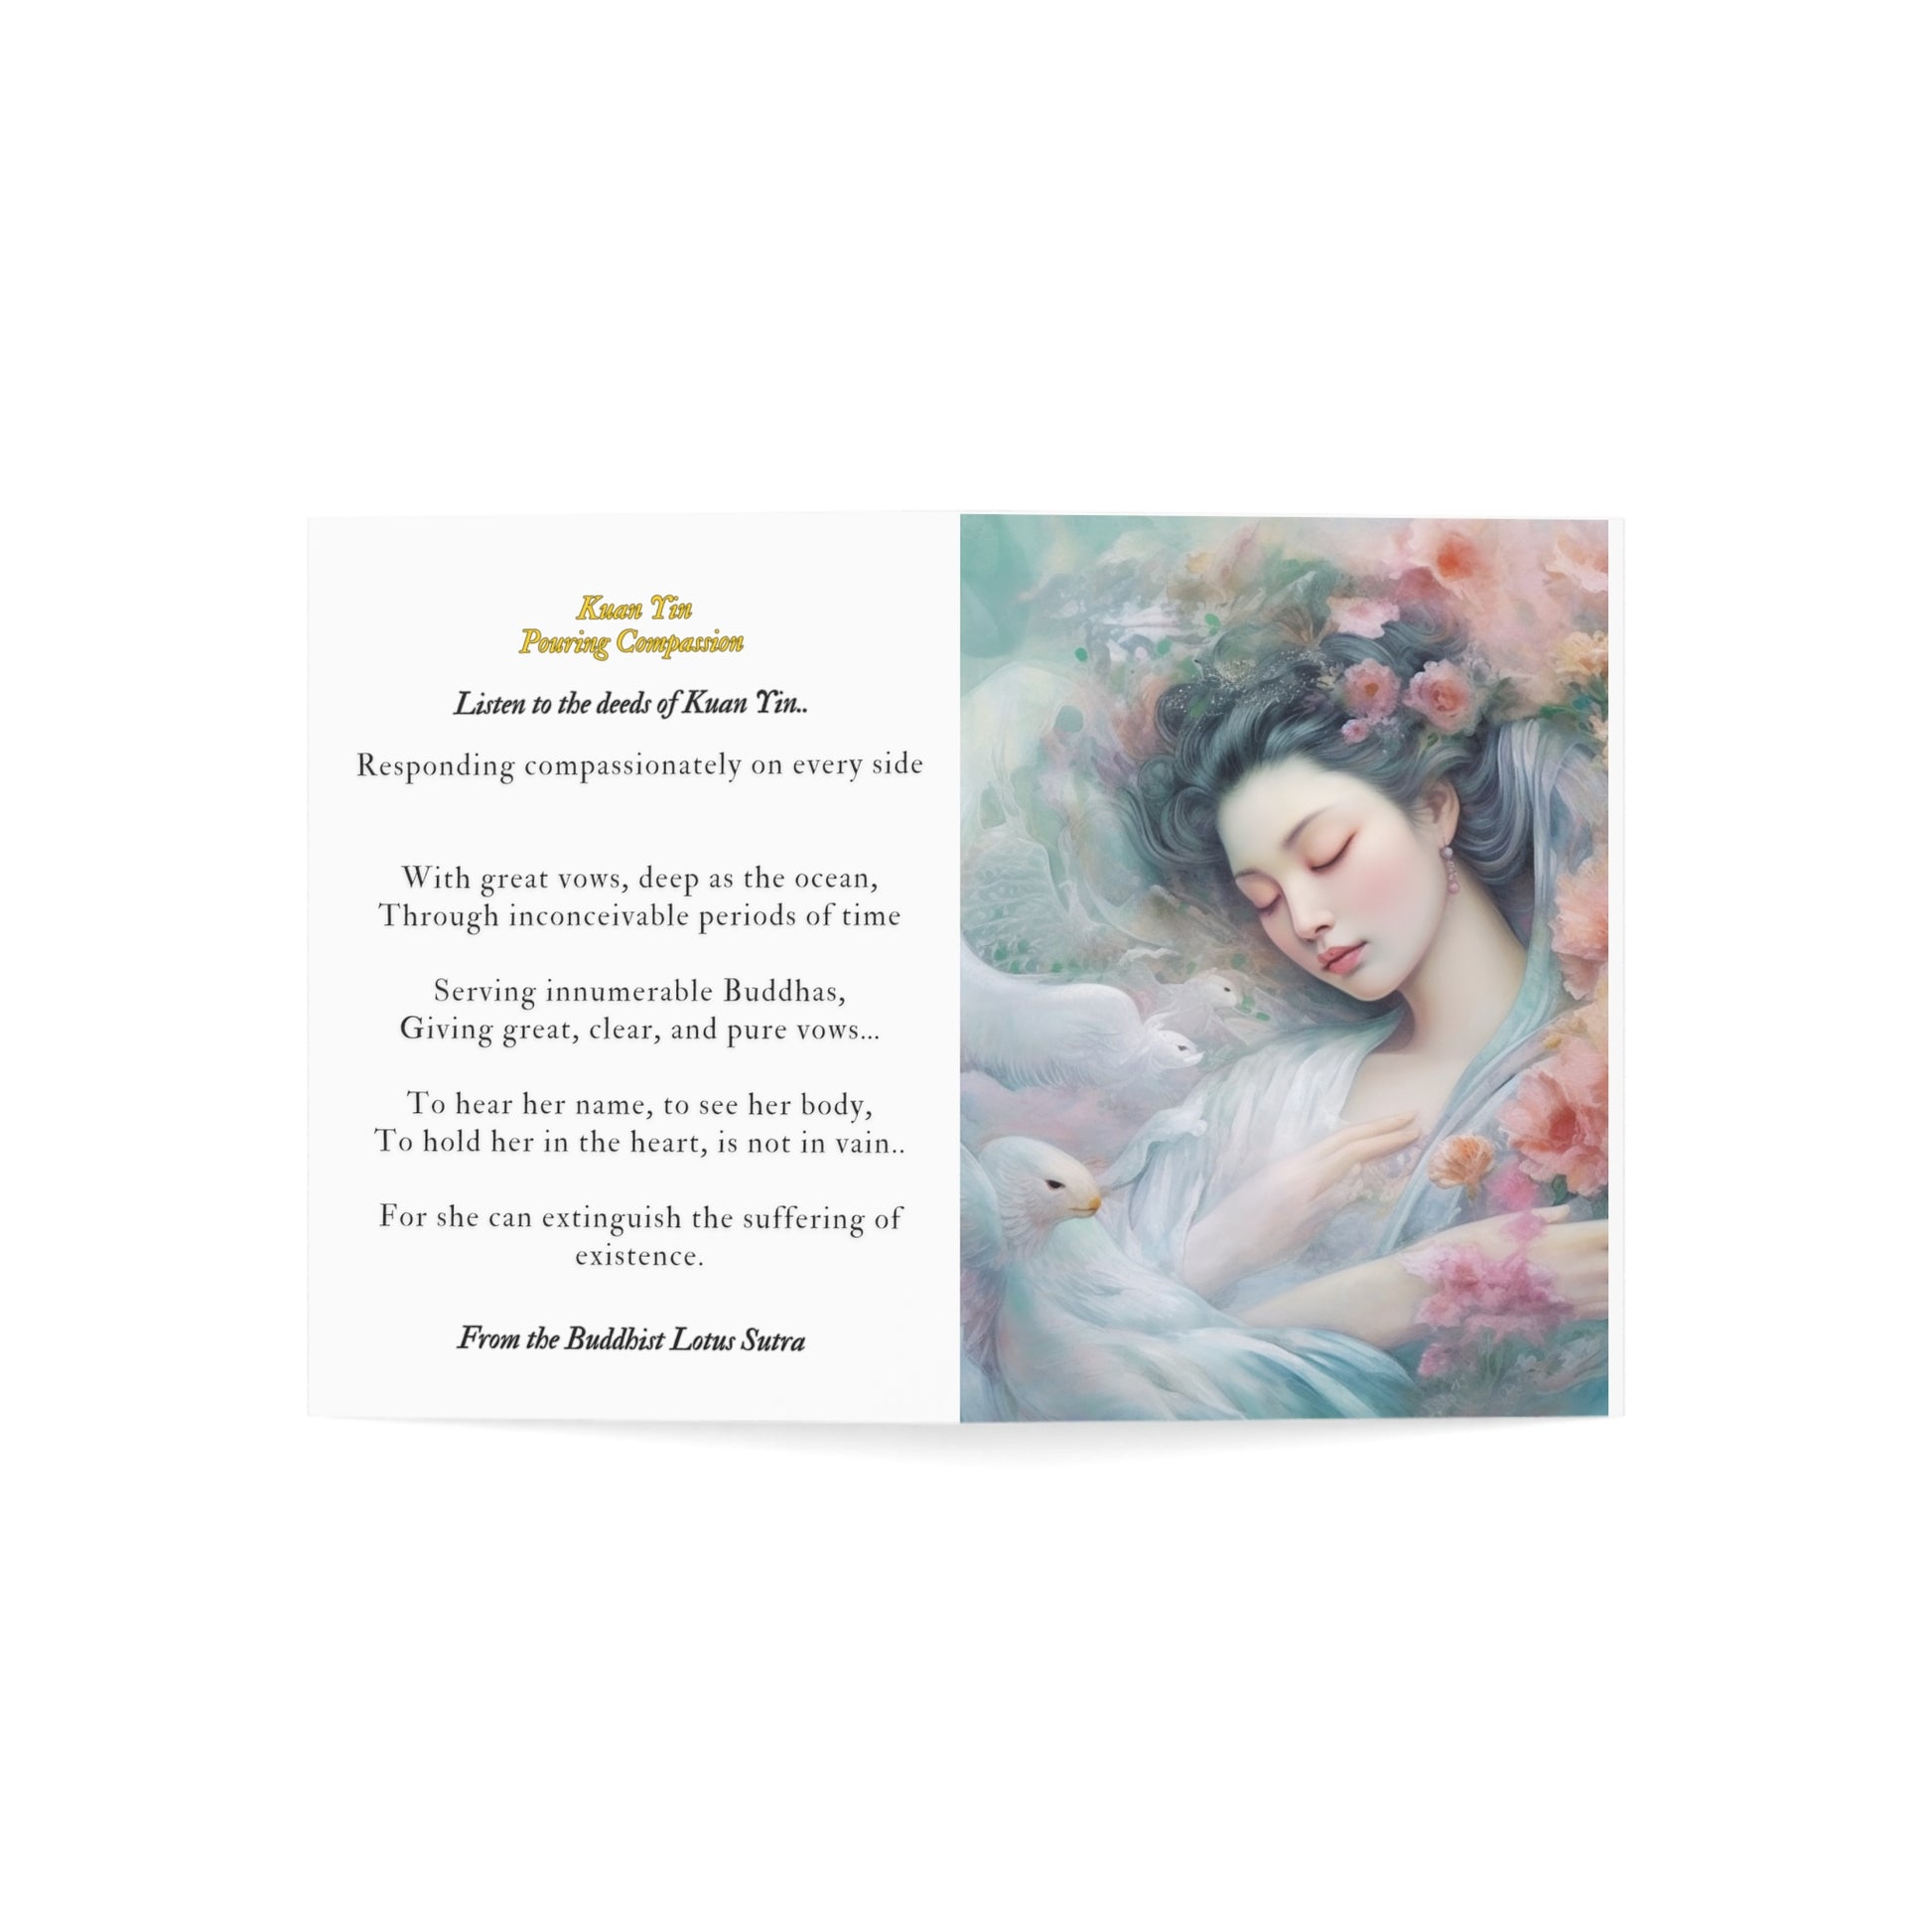 Handmade Greeting Card | Custom Printed Card - Blank Inside - A2 Size | Quan Yin Card - Mother of Compassion - Kuan Yin | Gift Card - Listen to the Deed of Quan Yin Paper products 4.6" x 6.25" (Vertical) Coated (both sides) 1 pc